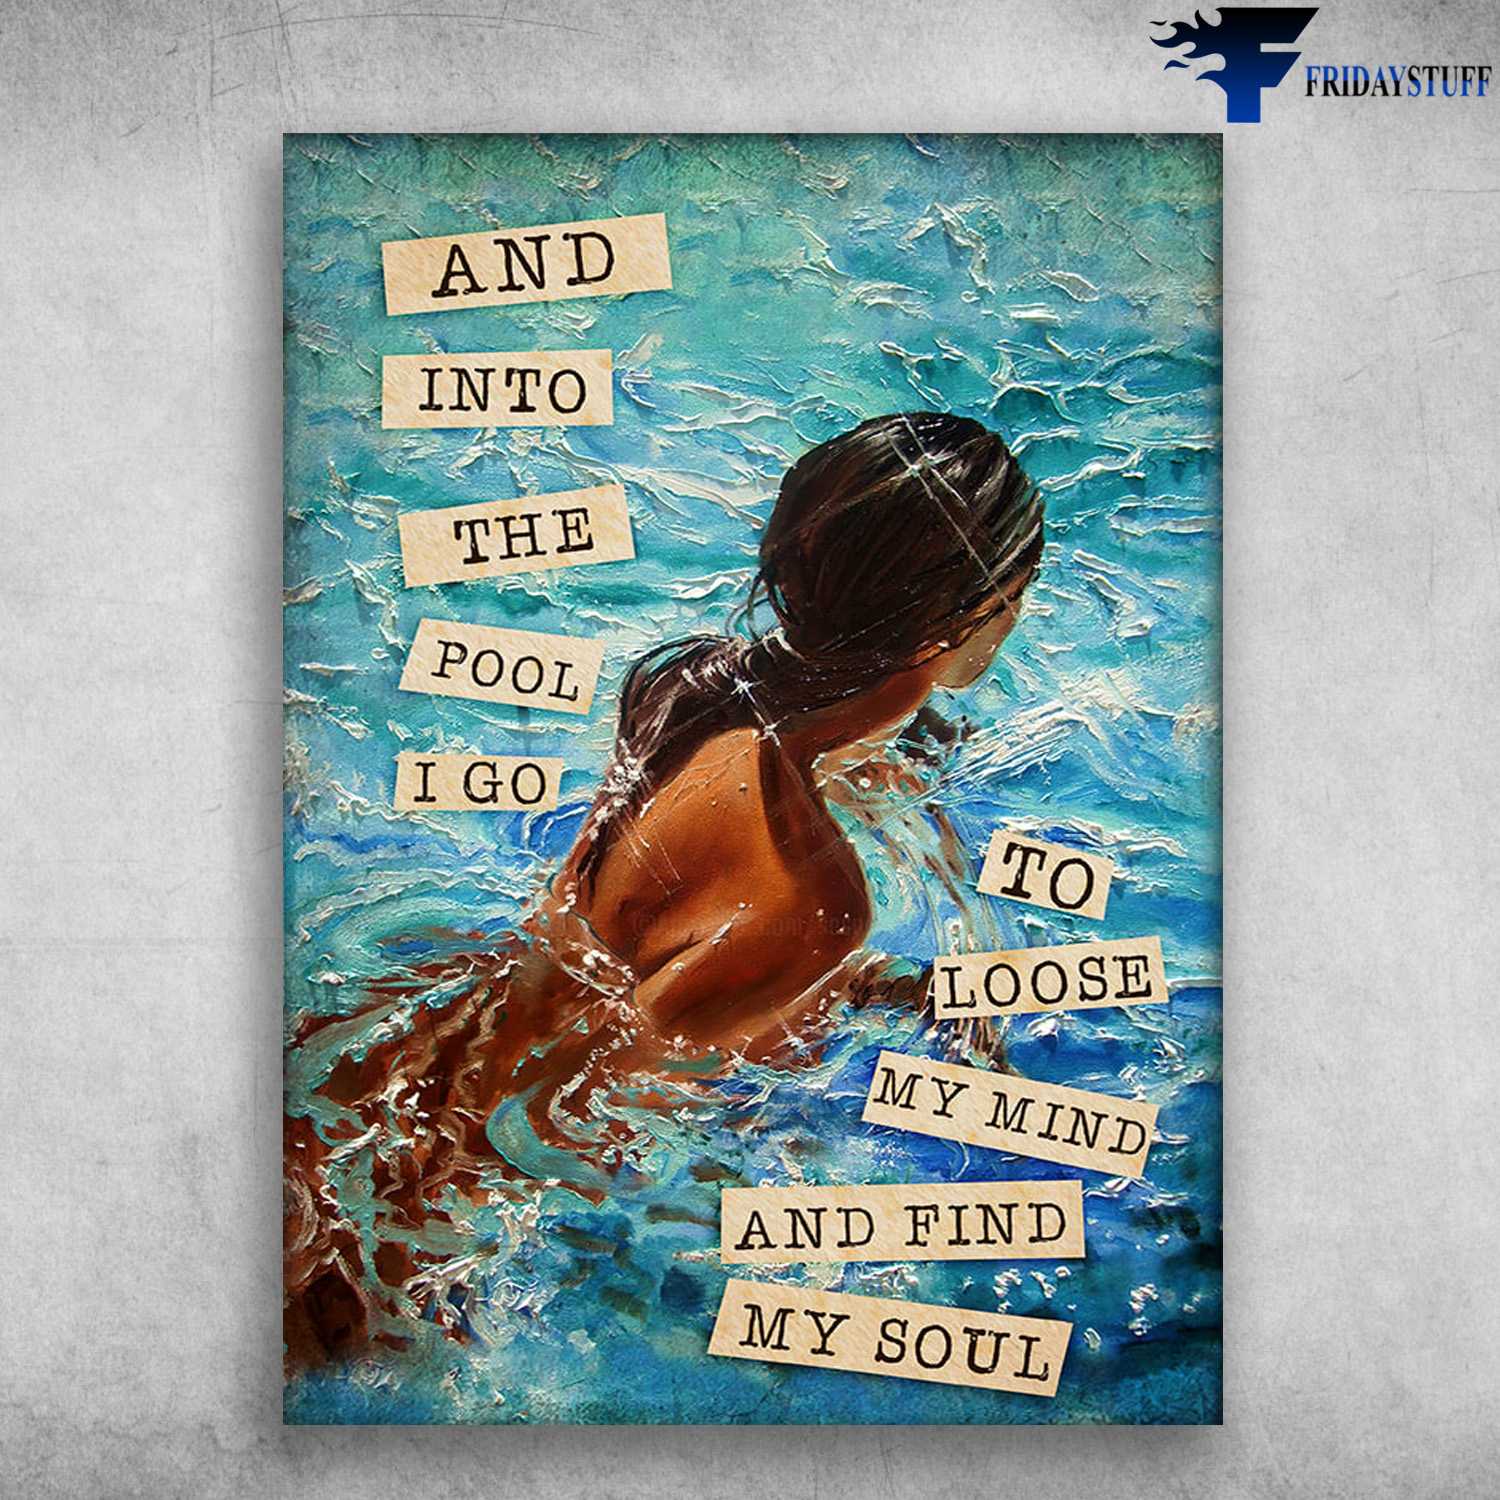 Lady Swimming, Pool Poster, And Into The Pool, I Go To Lose My Mind, And Find My Soul